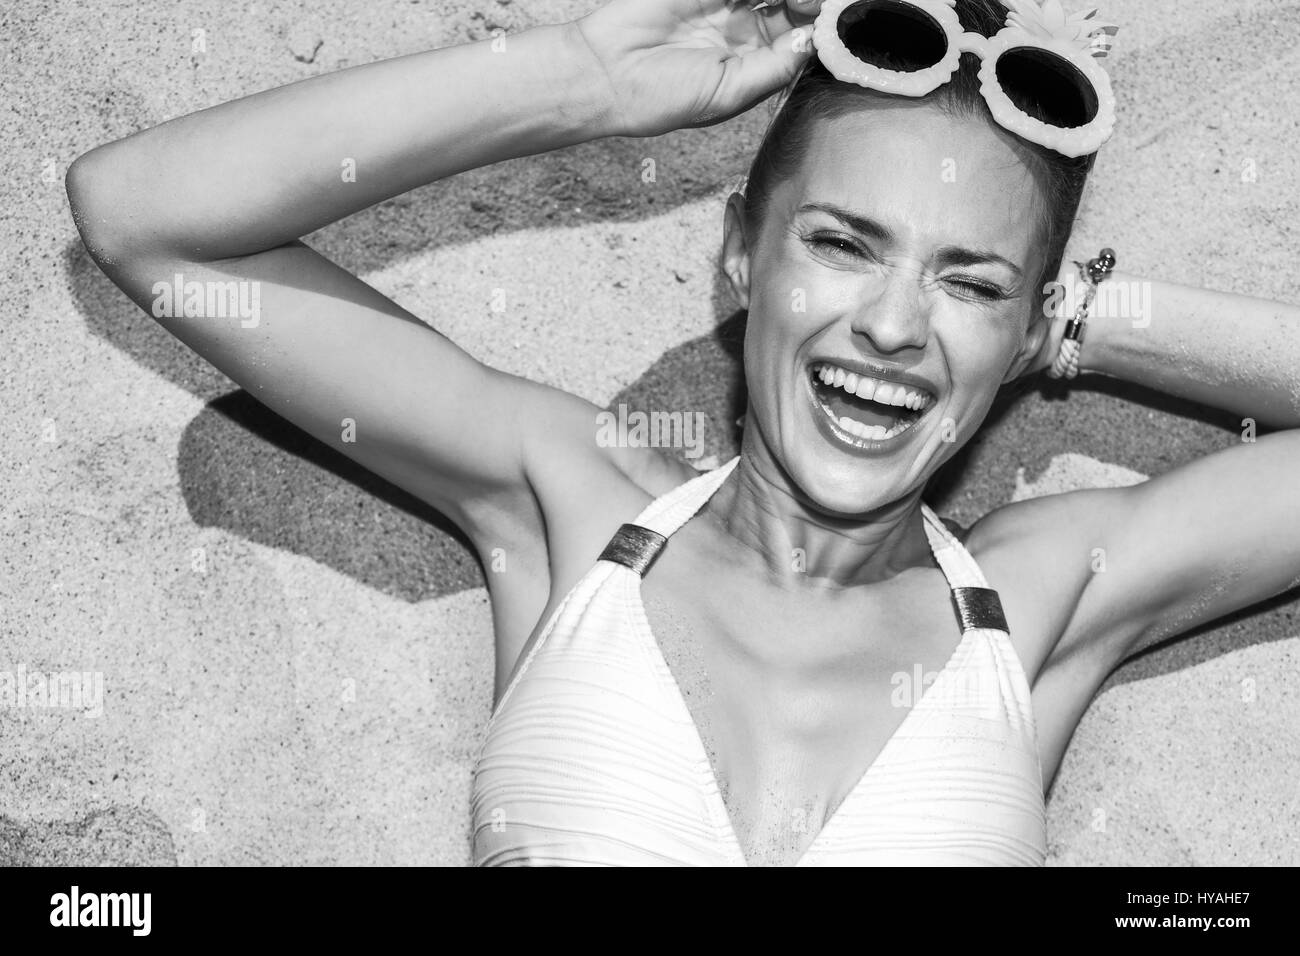 Warm sand treatment. Portrait of smiling woman in swimsuit with funny pineapple glasses laying on the sand and winking Stock Photo